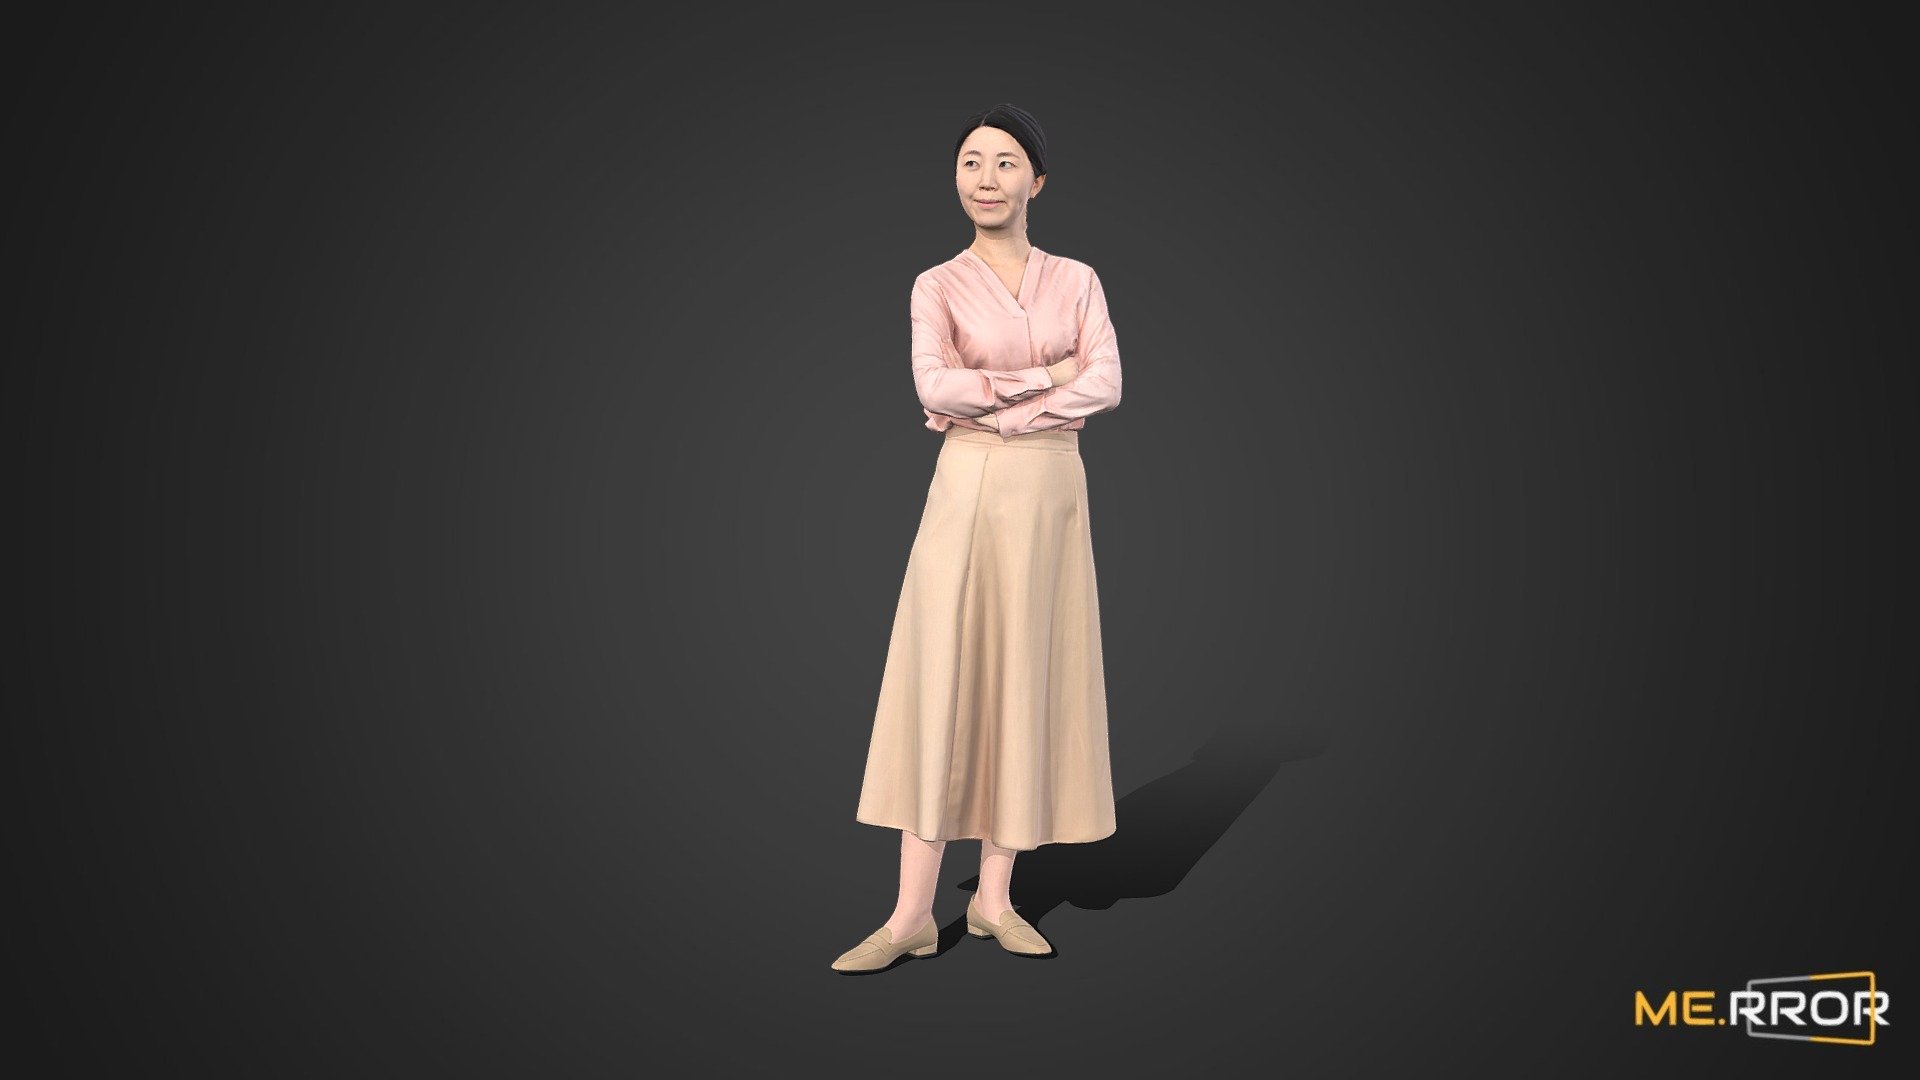 ME.RROR


From 3D models of Asian individuals to a fresh selection of free assets available each month - explore a richer diversity of photorealistic 3D assets at the ME.RROR asset store!

https://me-rror.com/store




[Model Info]




Model Formats : FBX, MAX

Texture Maps (8K) : Diffuse,Normal

If you encounter any problems using this model, please feel free to contact us. We'd be glad to help you.



[About ME.RROR]

Step into the future with ME.RROR, South Korea's leading 3D specialist. Bespoke creations are not just possible; they are our specialty.

Service areas:




3D scanning

3D modeling

Virtual human creation

Inquiries: https://merror.channel.io/lounge - [Game-ready] Asian Woman Scan_Posed 23 - Buy Royalty Free 3D model by ME.RROR Studio (@merror) 3d model